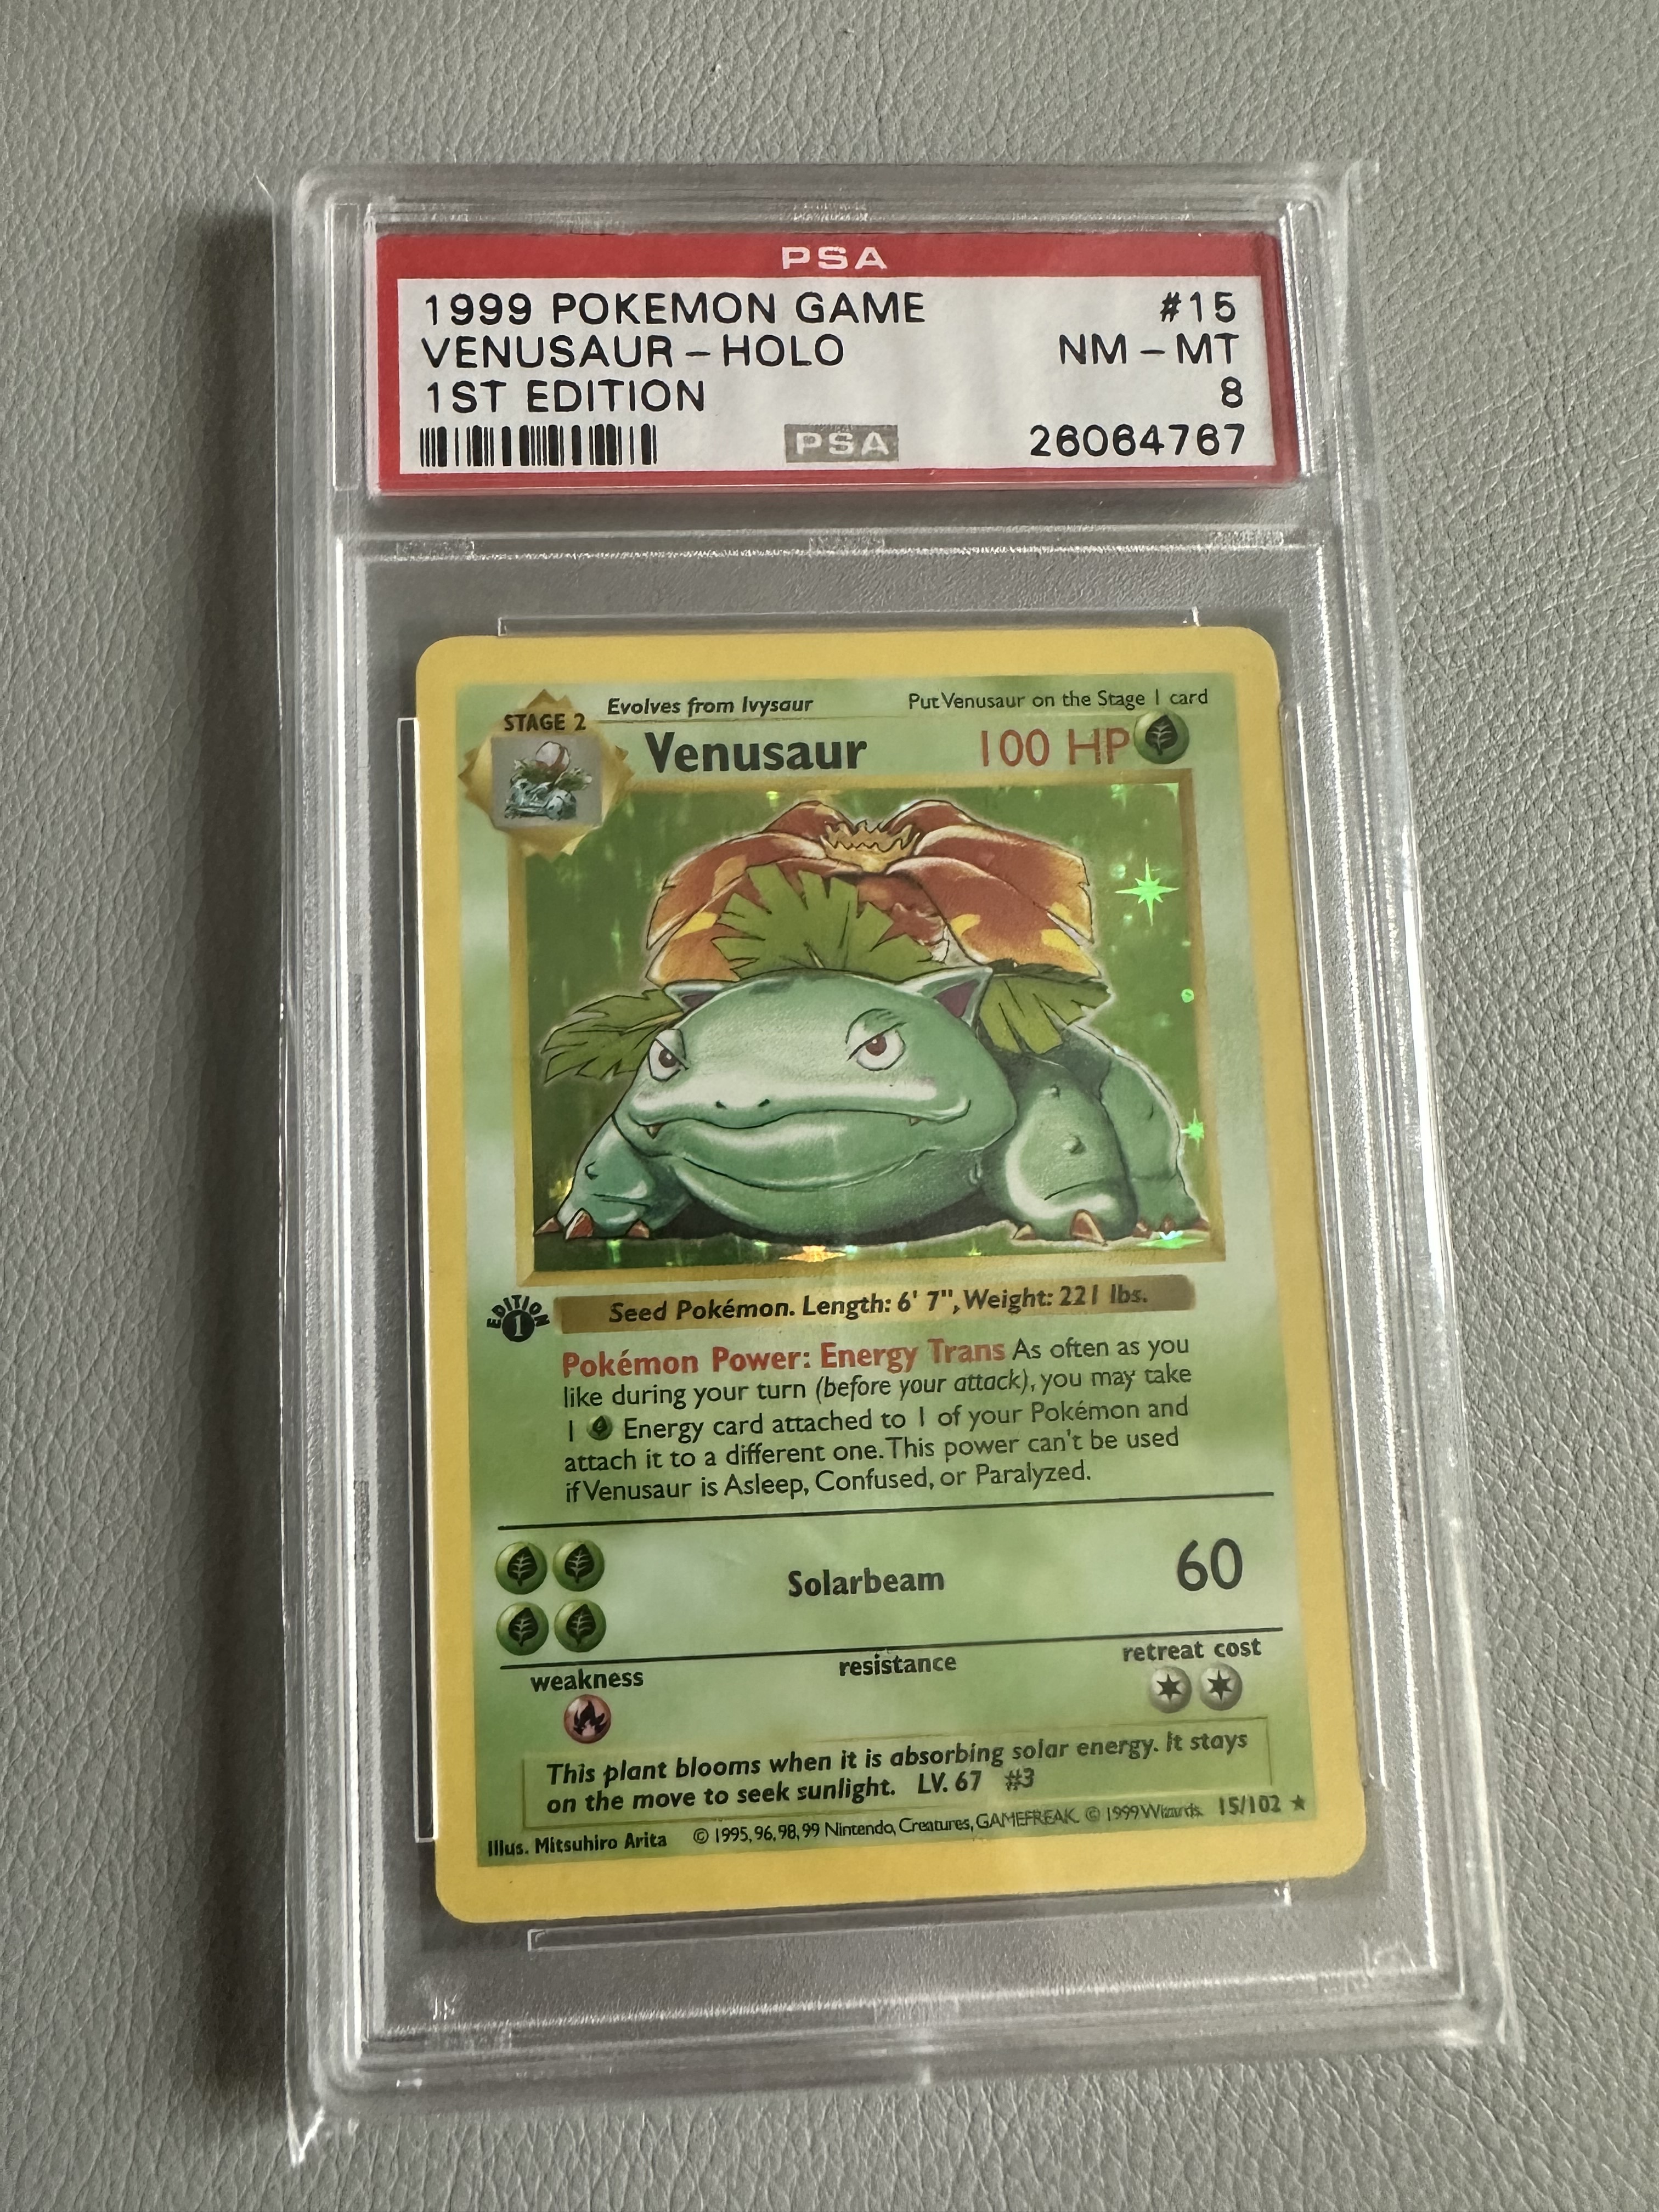 The last of my recent Mewtwo grail pickups! This PSA 10 Legends